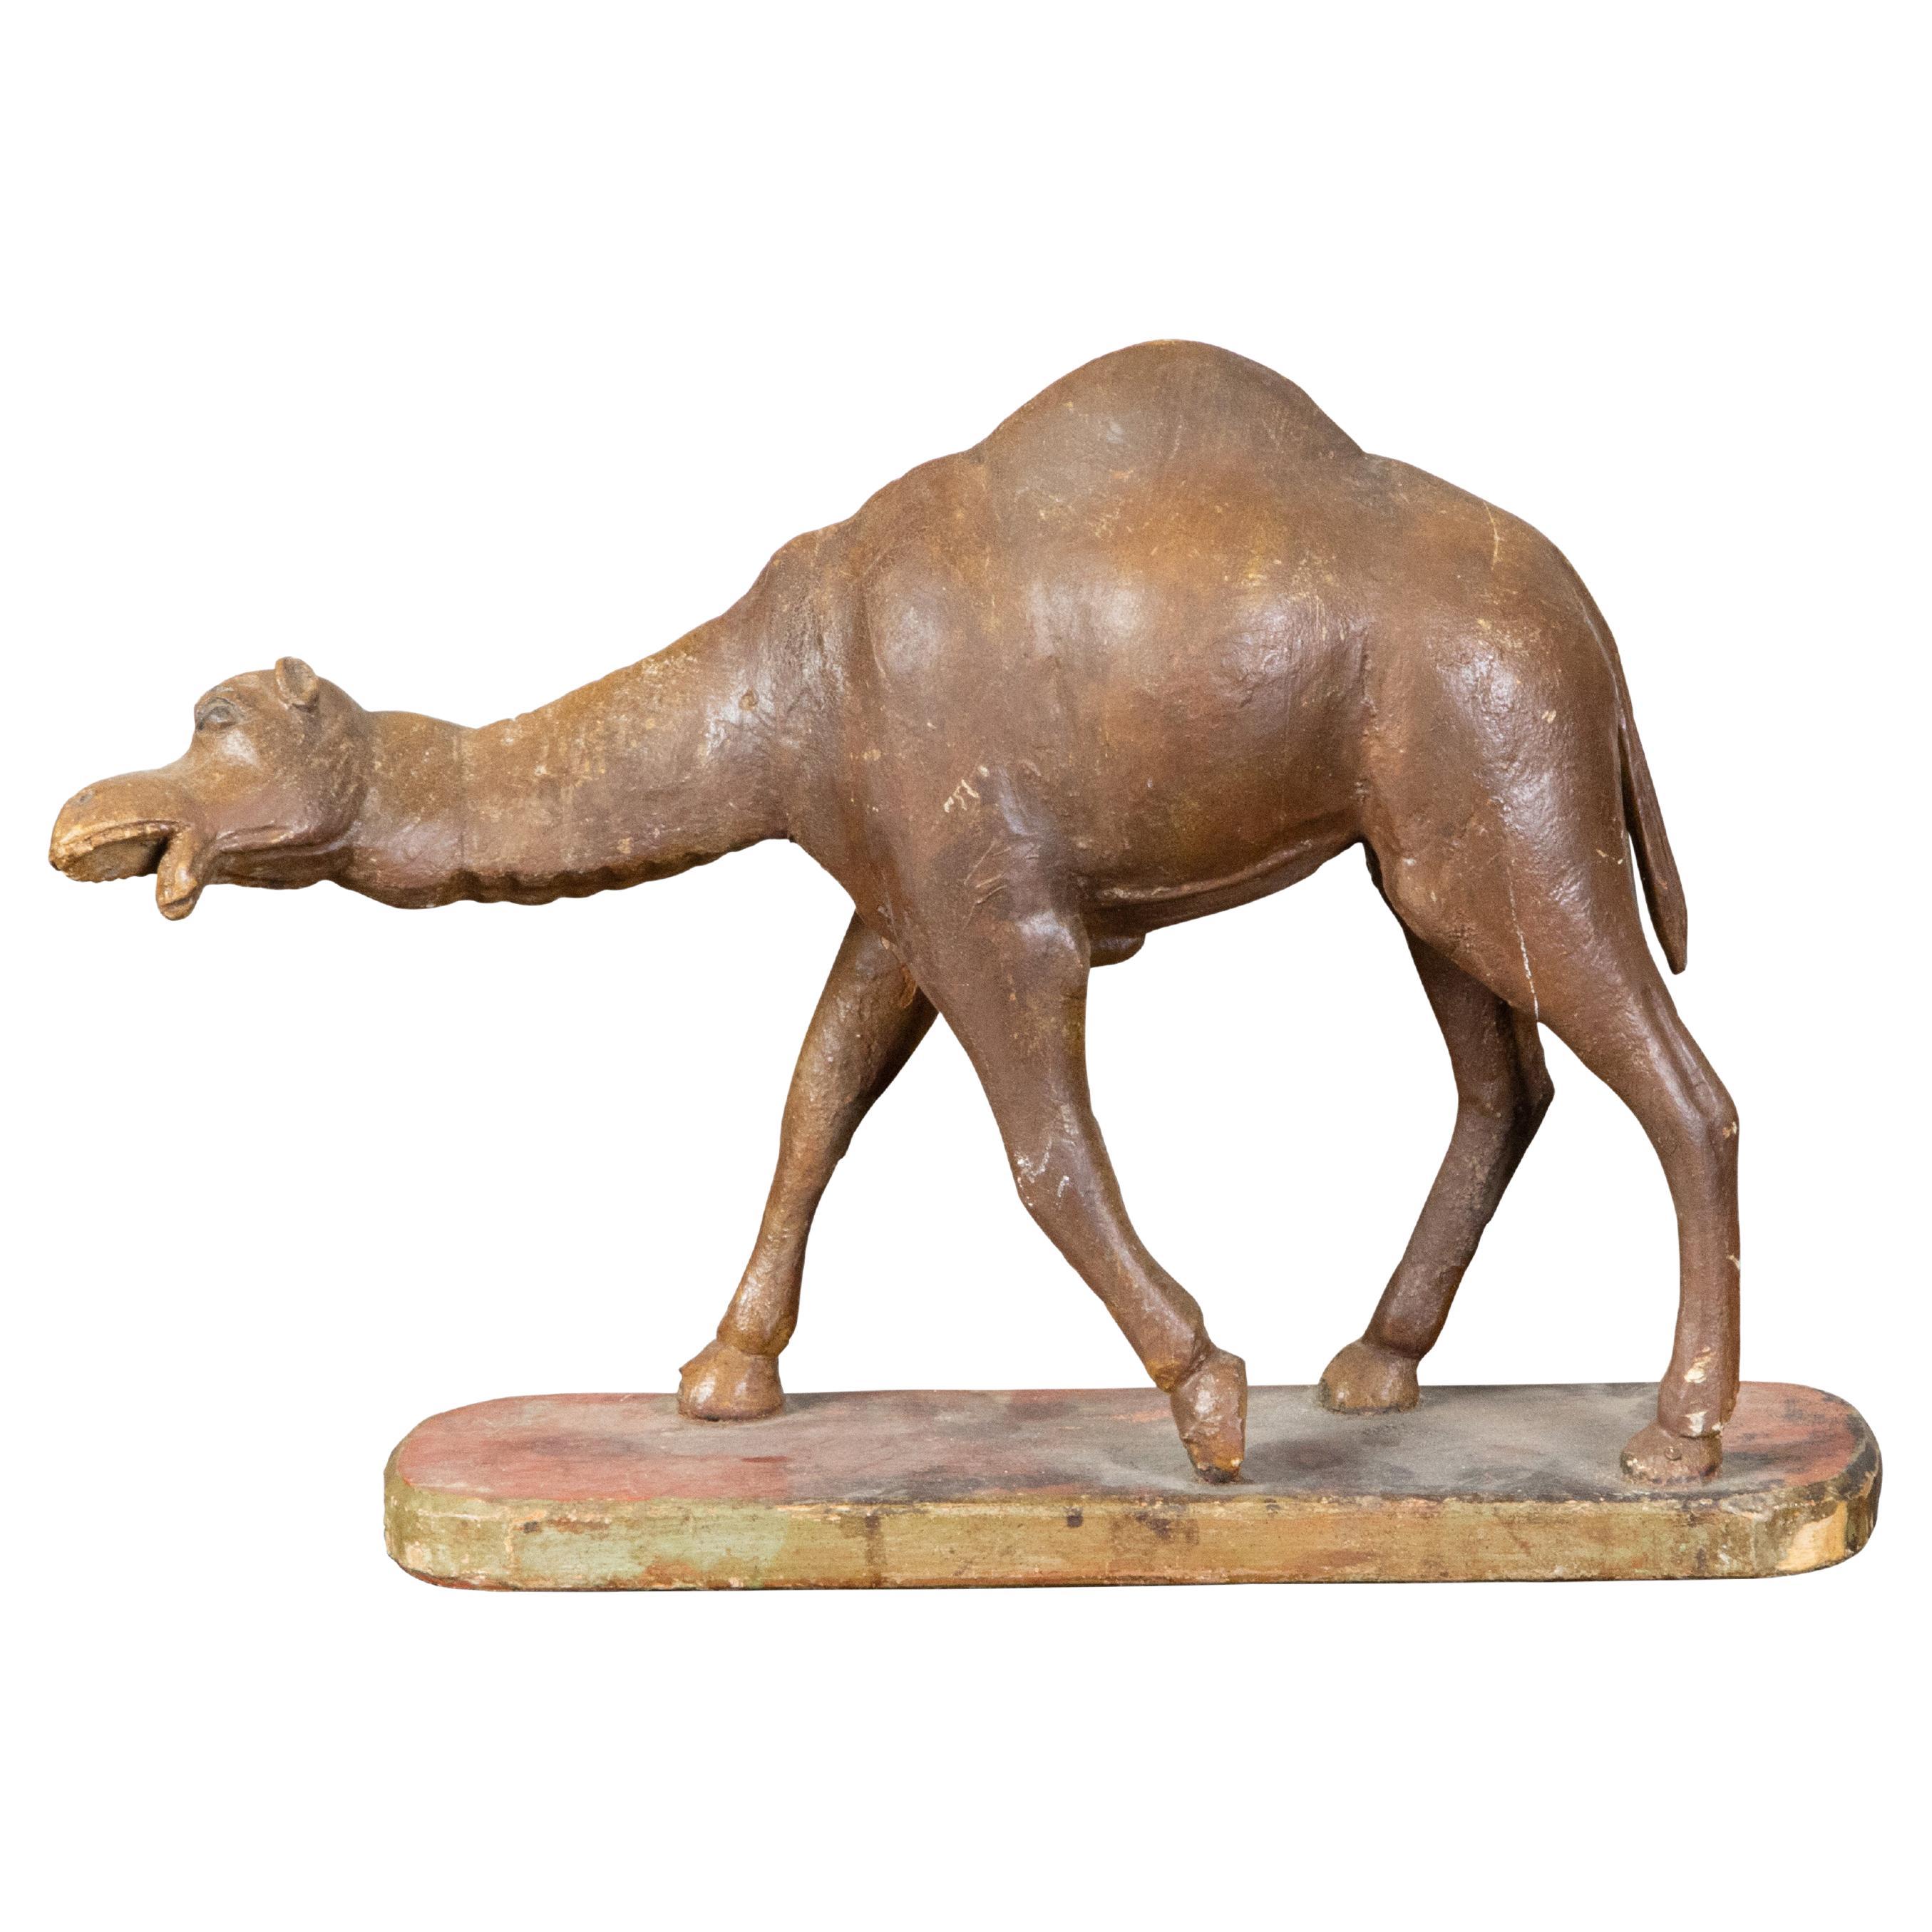 19th Century Italian Carved Wooden Dromedary Camel Sculpture on Oval Base For Sale